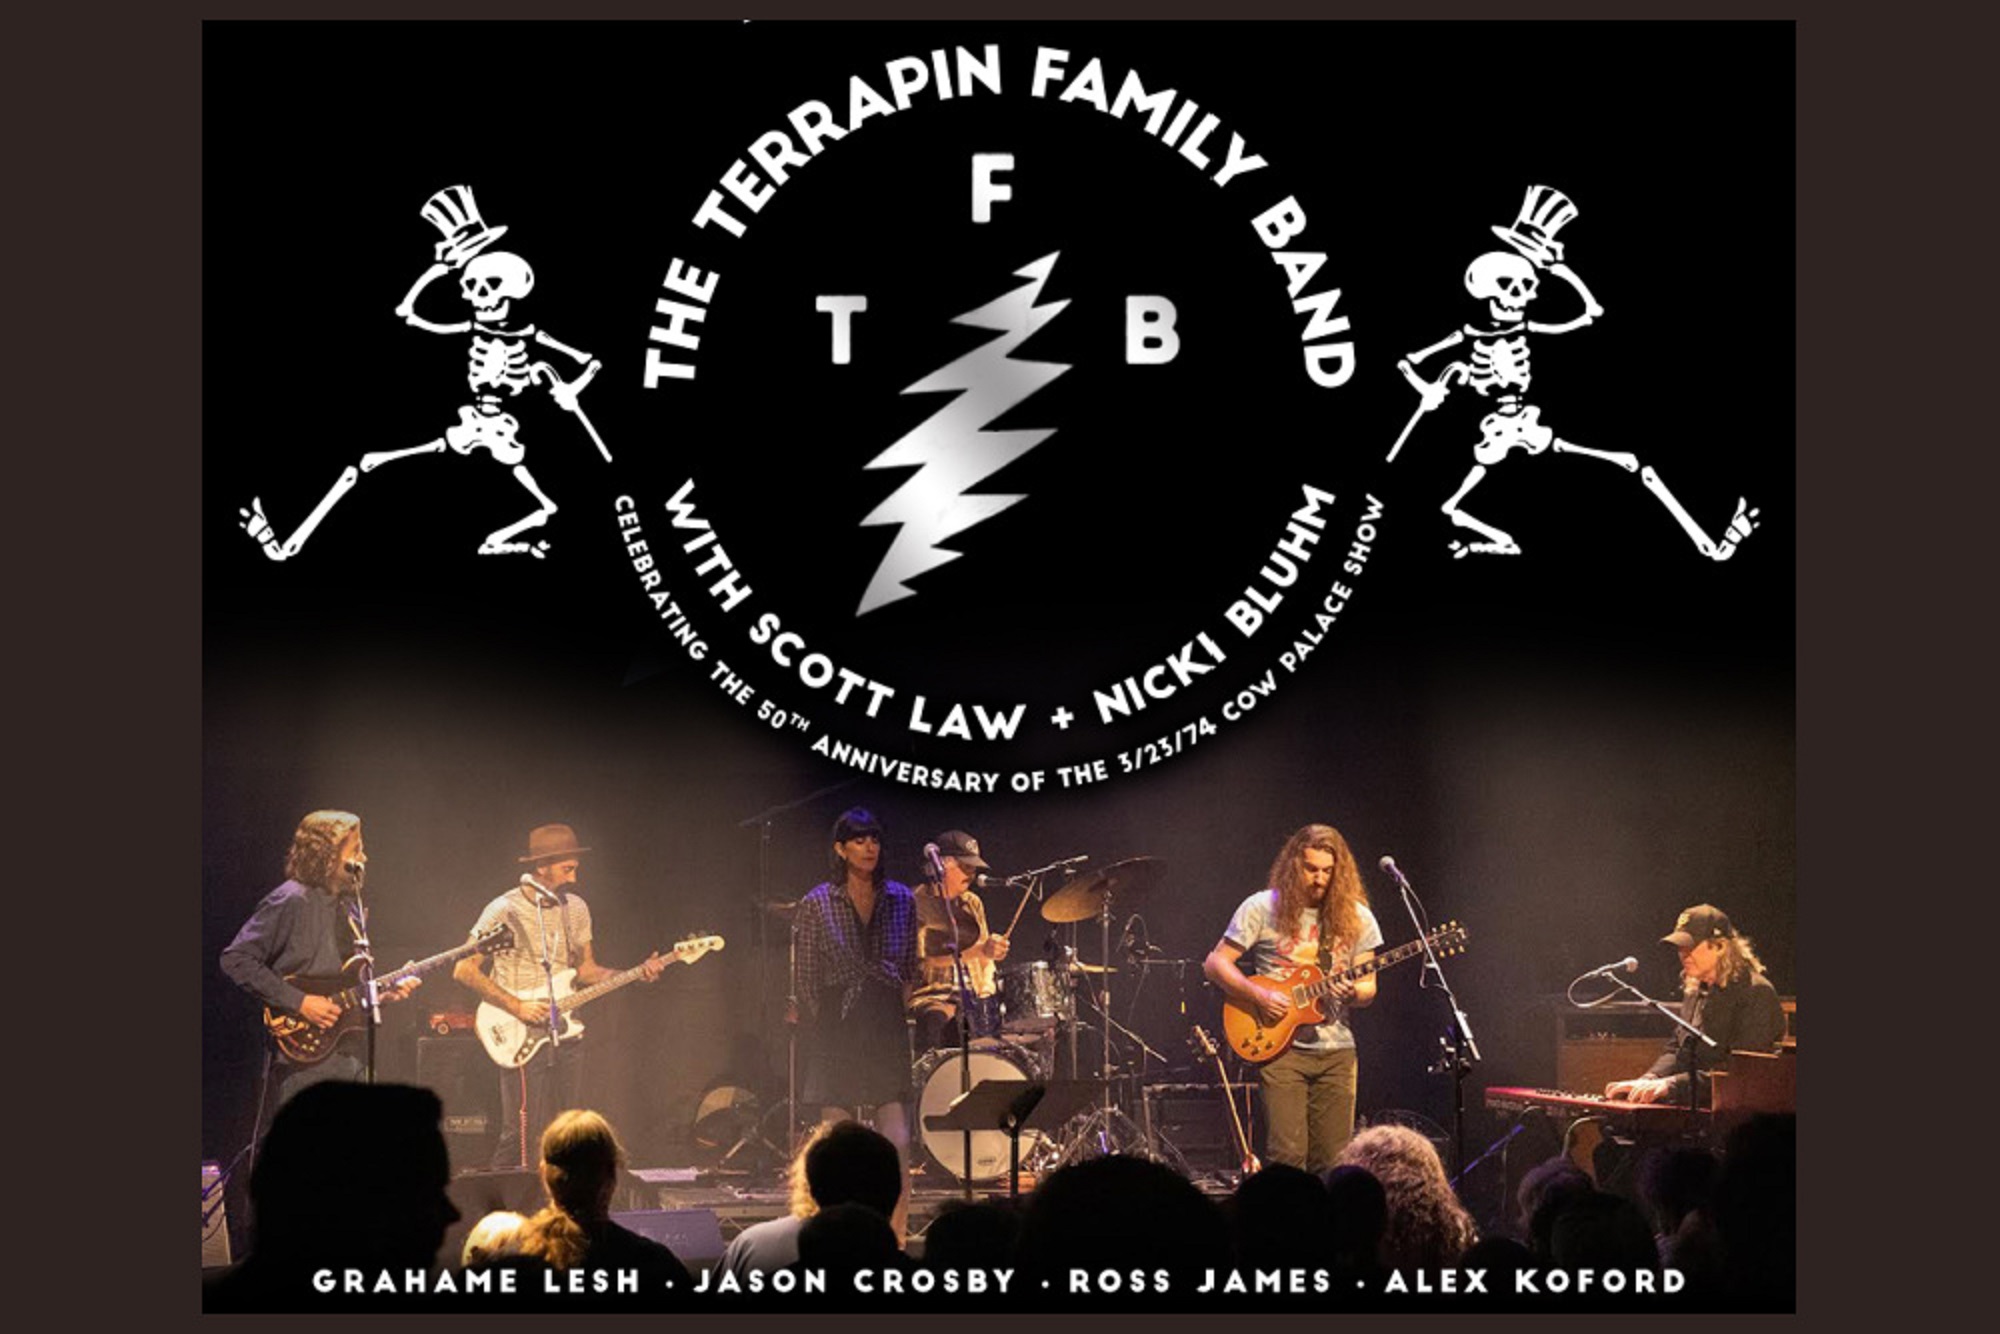 Celebrate the Grateful Dead's Iconic 50th Anniversary with The Terrapin Family Band and Special Guests at JaM Cellars Ballroom